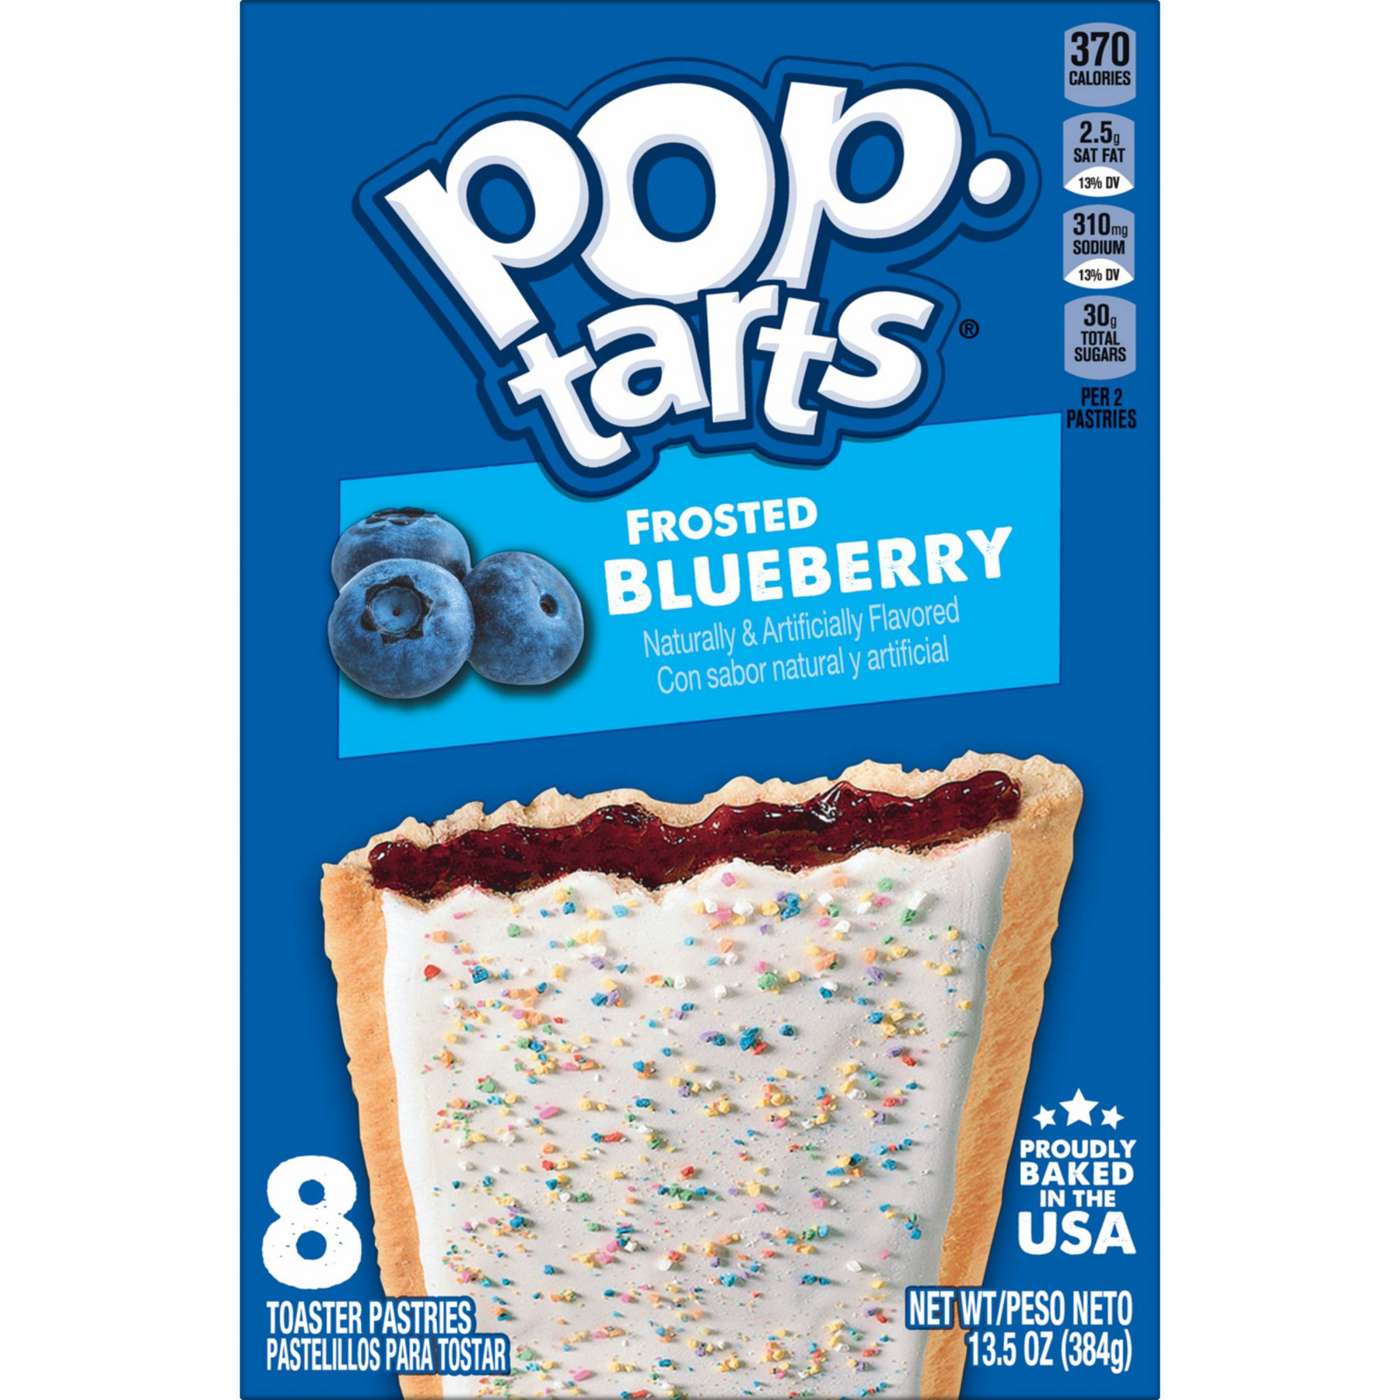 Pop-Tarts Frosted Blueberry Toaster Pastries; image 1 of 2